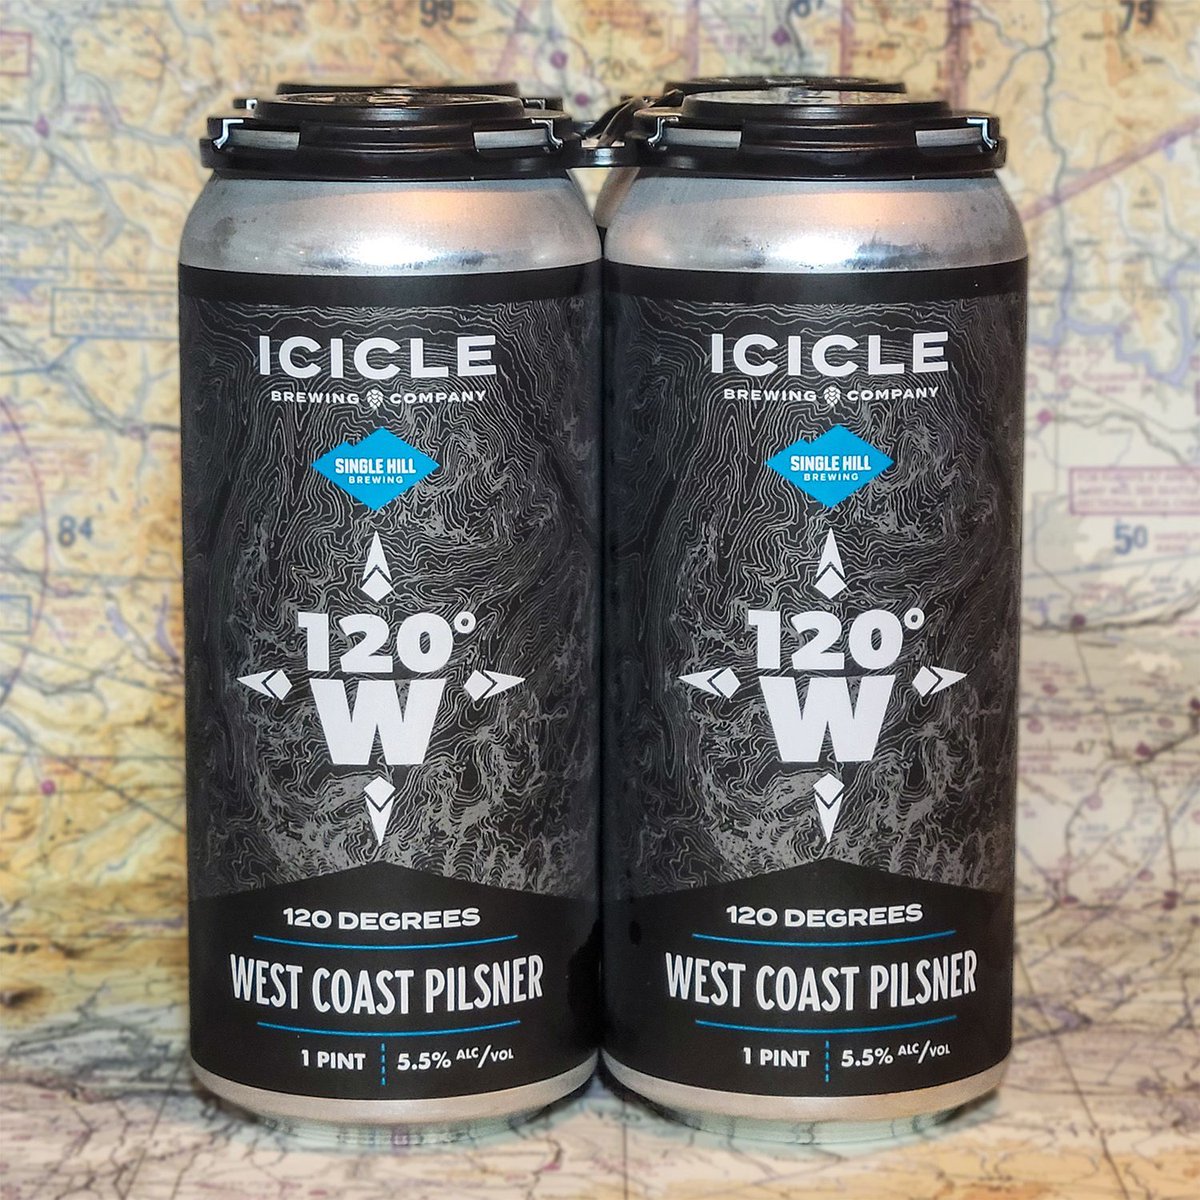 NEW BEER RELEASE: 120 Degrees West Coast Pilsner, a collaboration with Single Hill Brewing! Together we've brewed up a modern, hop-forward pilsner with punchy notes in a smooth and highly drinkable brew. Available at our taproom today and in select locations soon! ABV: 5.5%